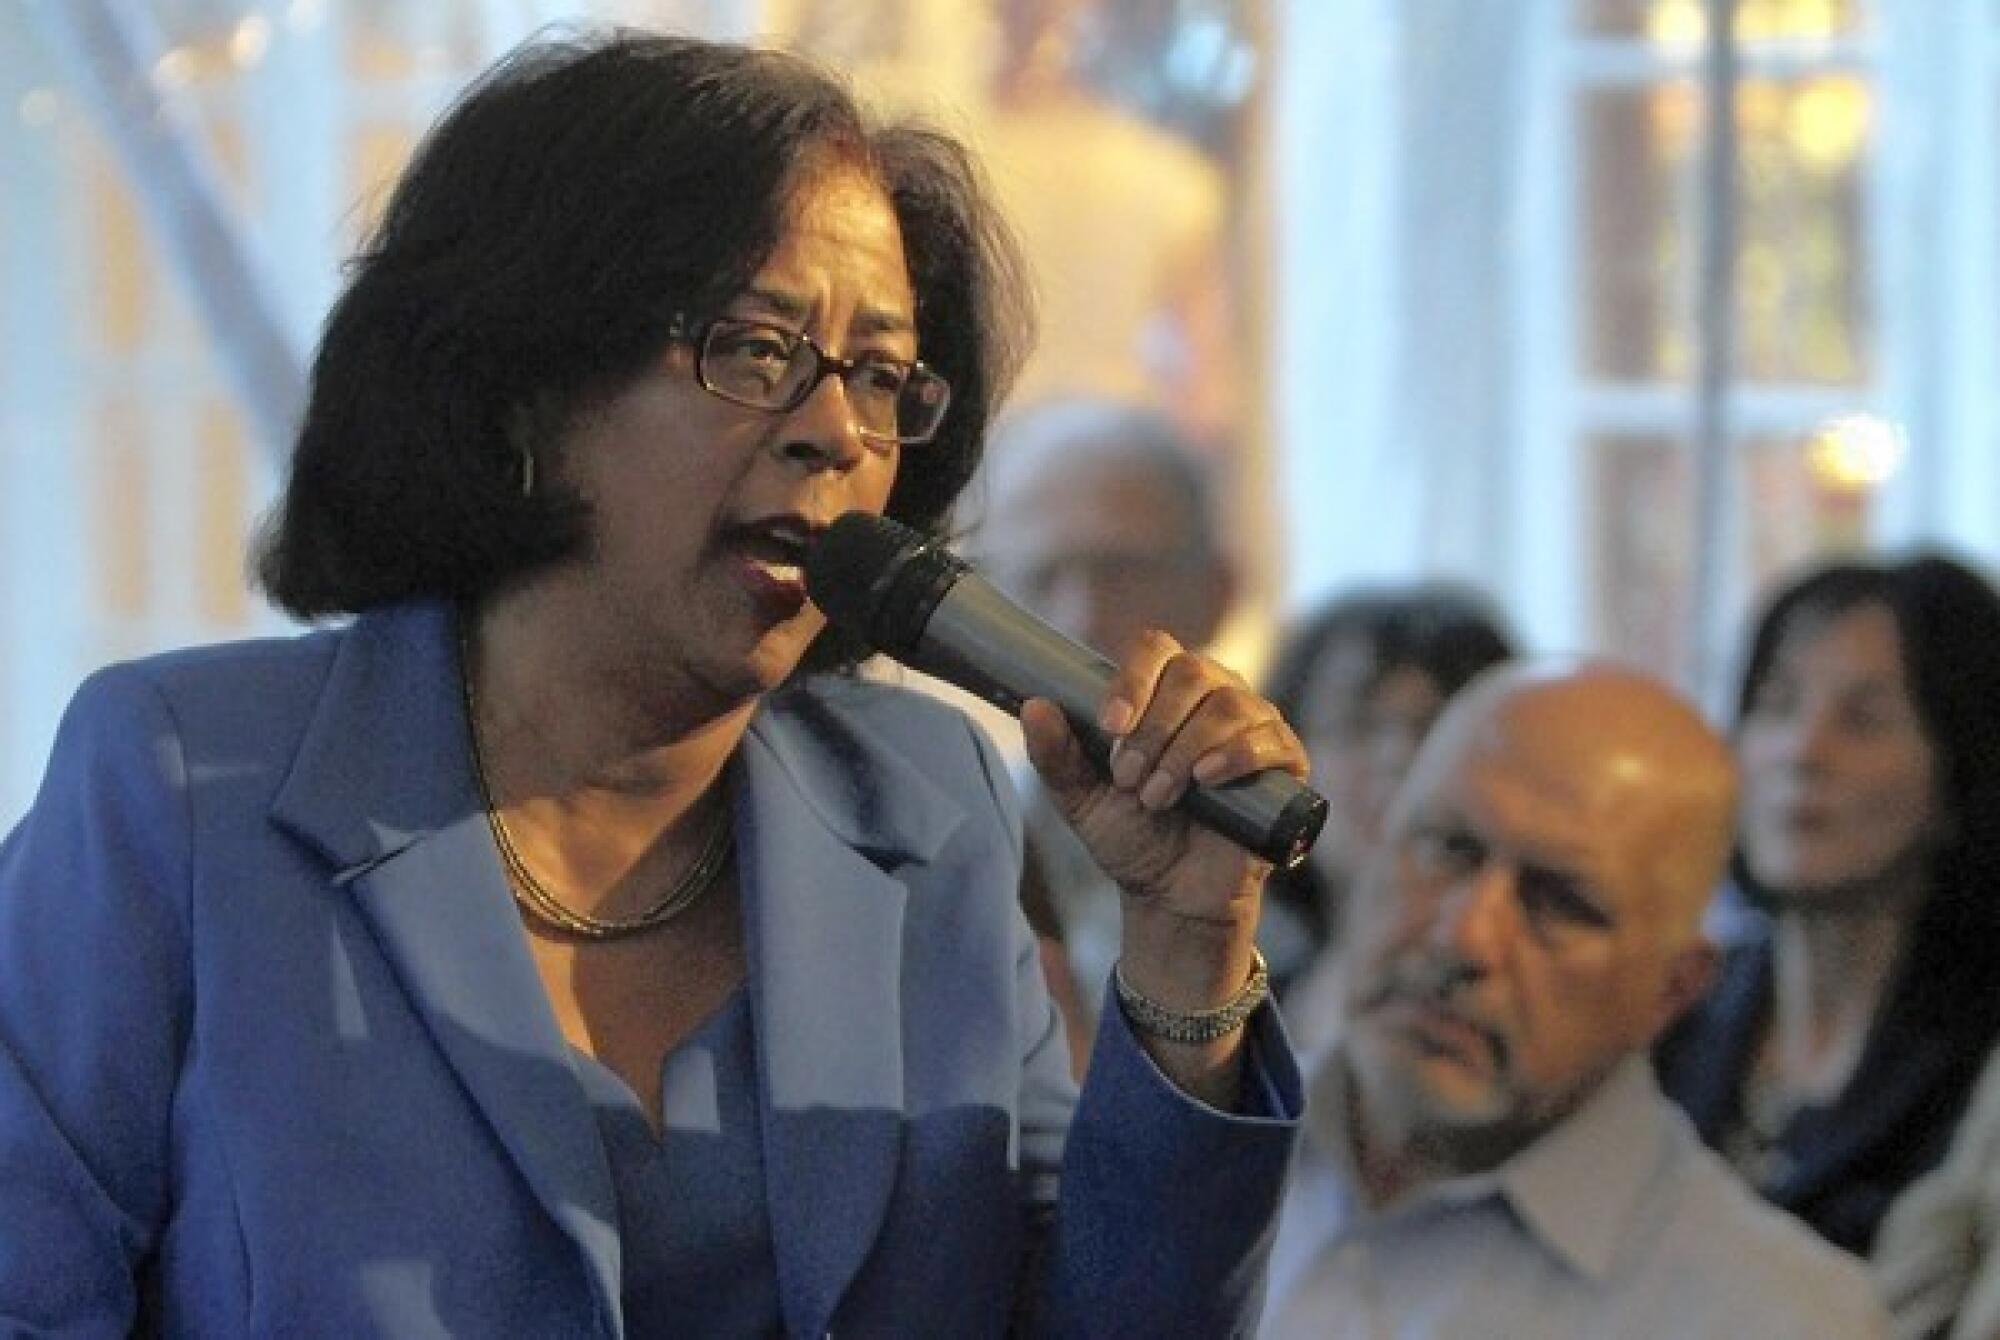 Former City Councilwoman Jan Perry, pictured in 2013.